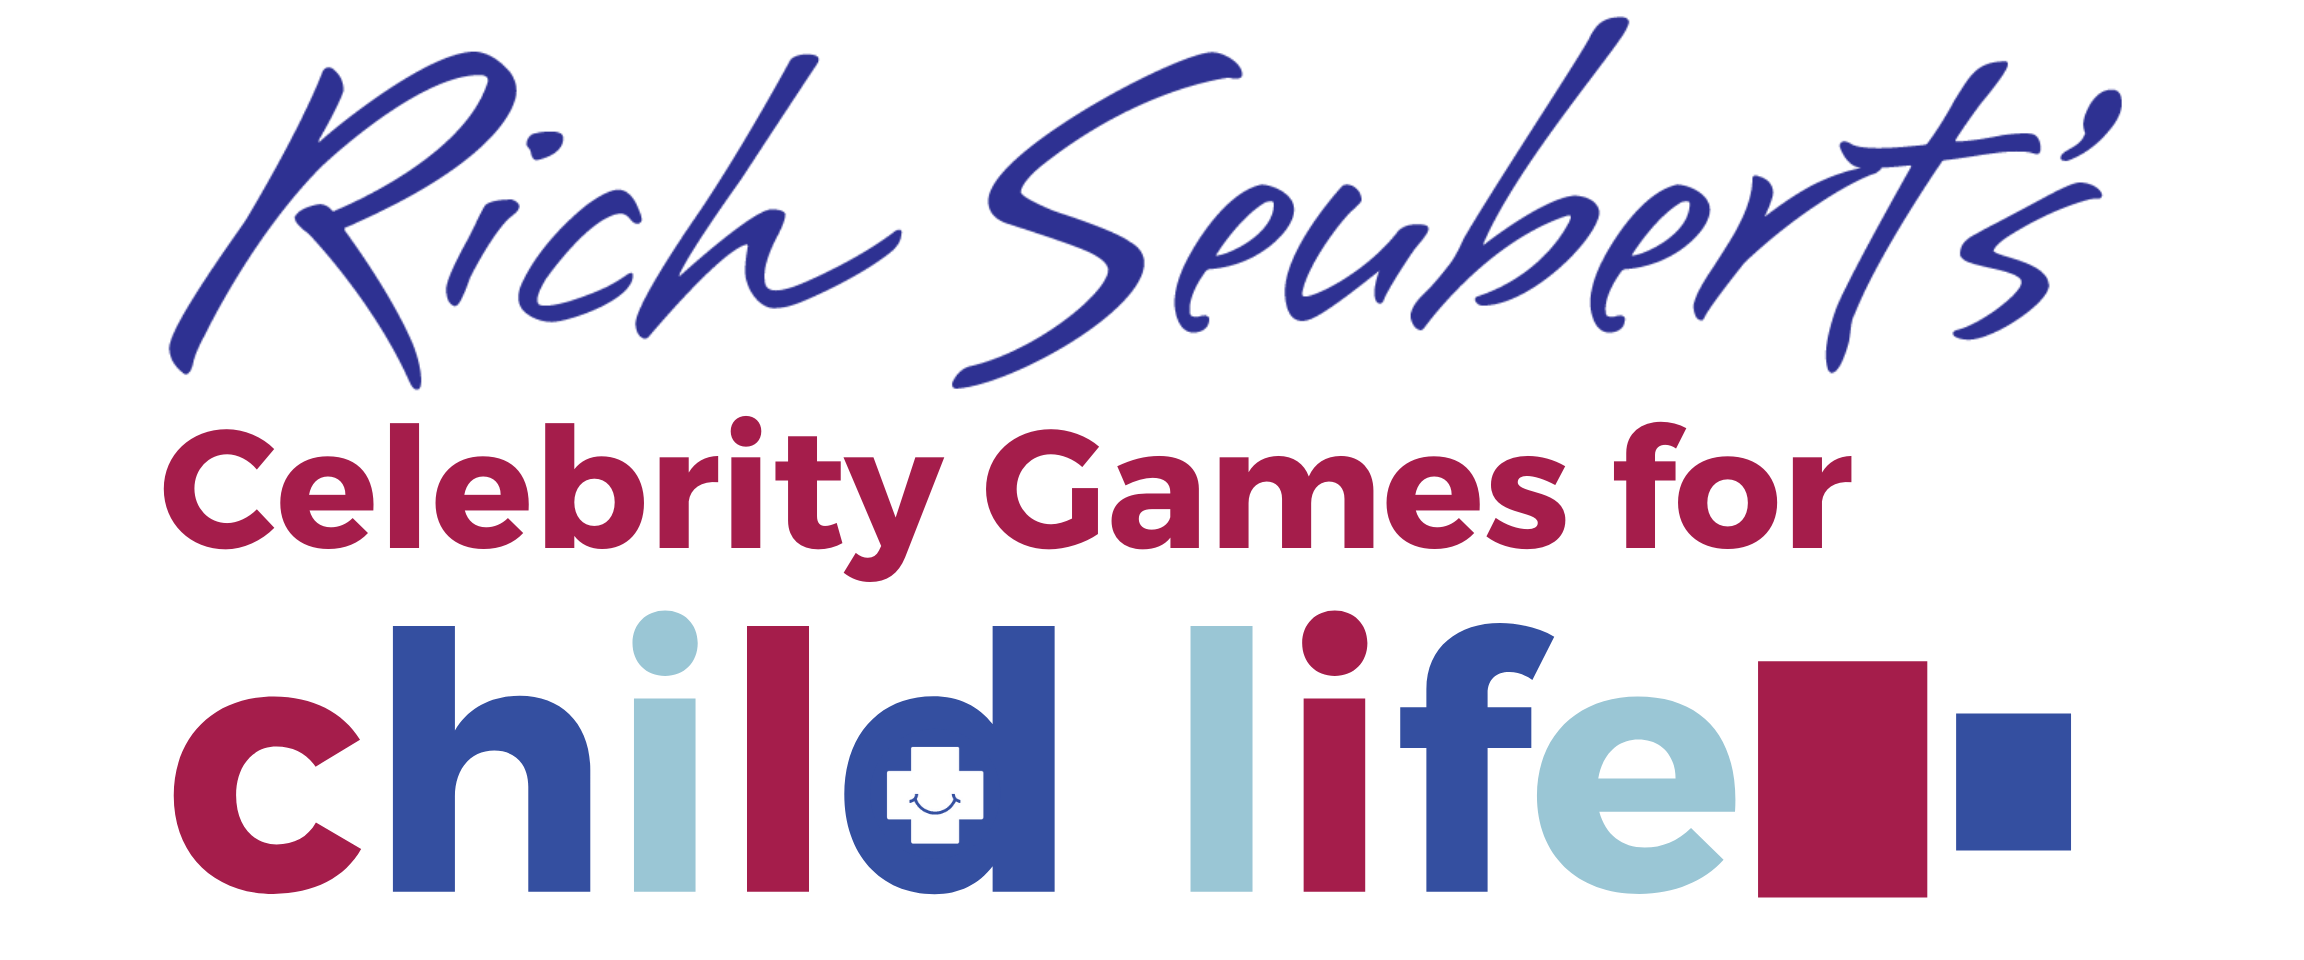 Rich Seubert’s Celebrity Games for Child Life